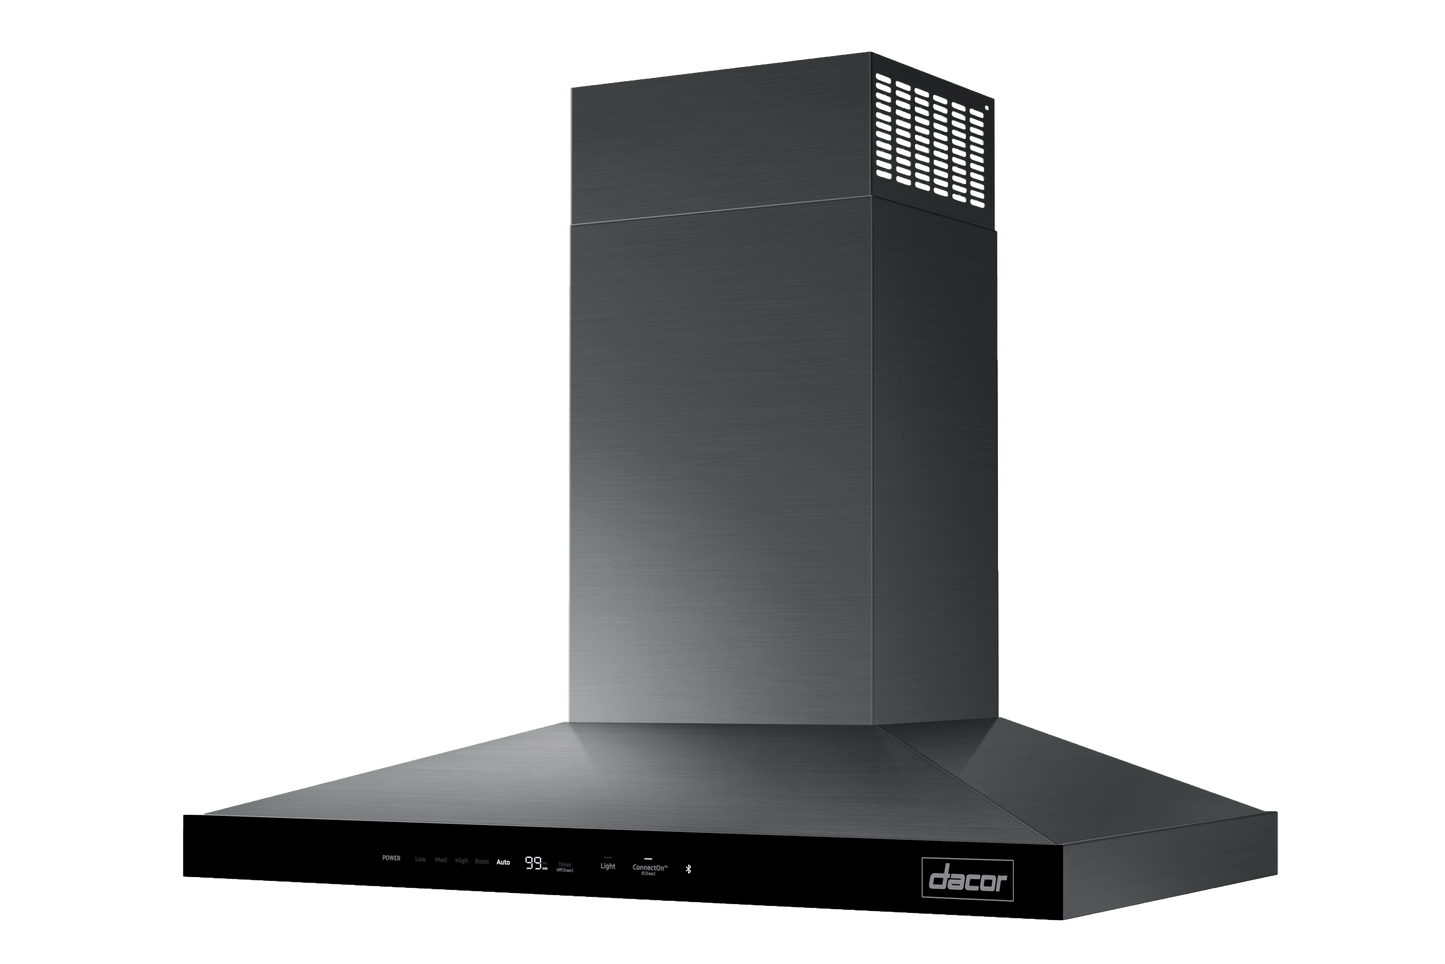 Dacor DHD30M700WM 30" Wall Hood With Connectivity, Graphite Stainless Steel